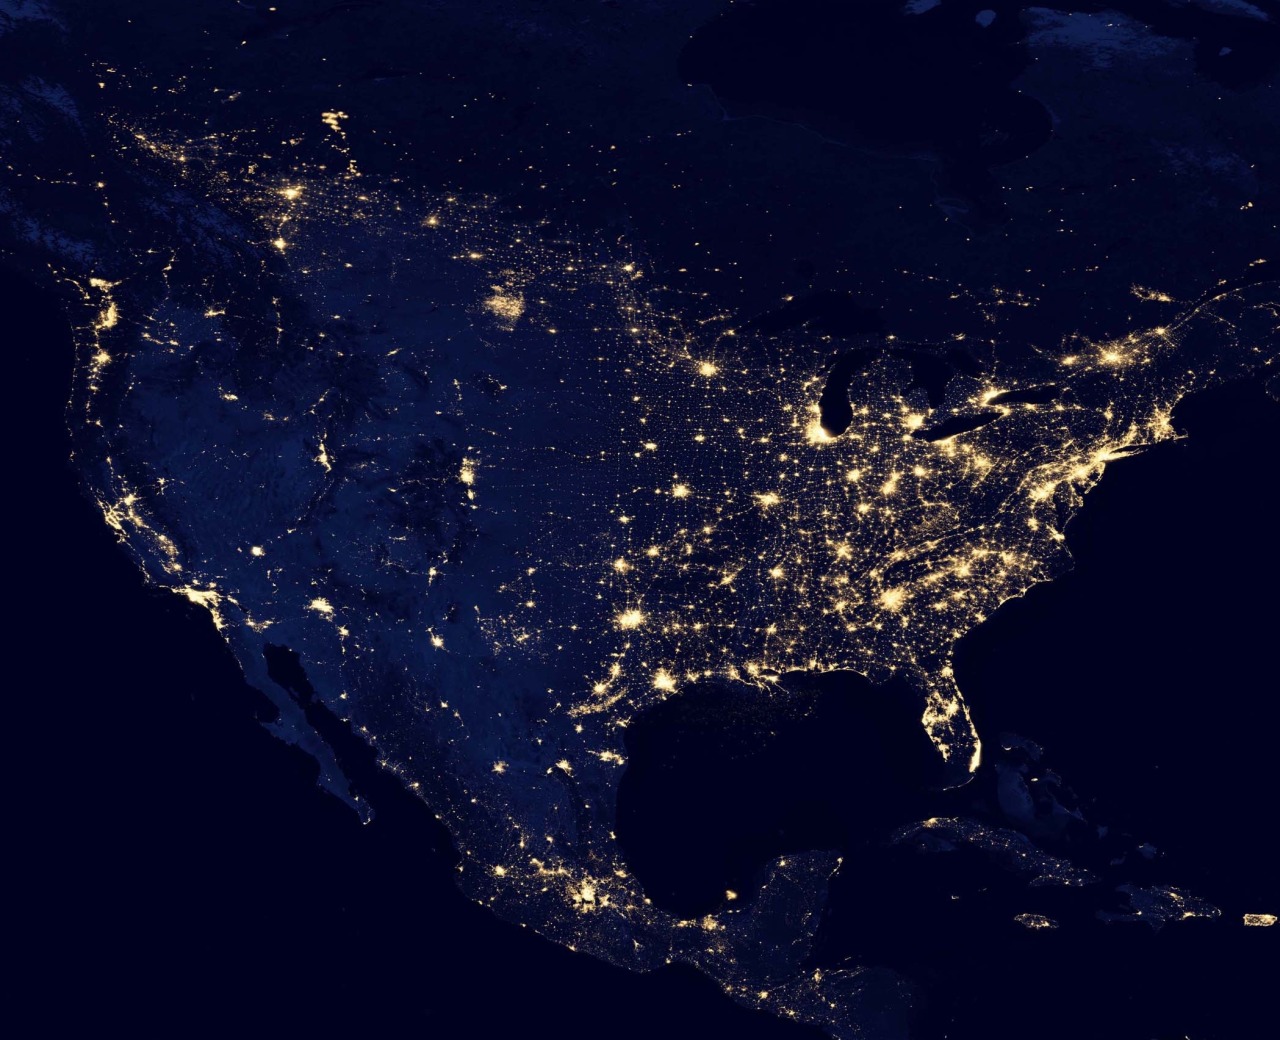 Satellite Reveals New Views of Earth at Night |...